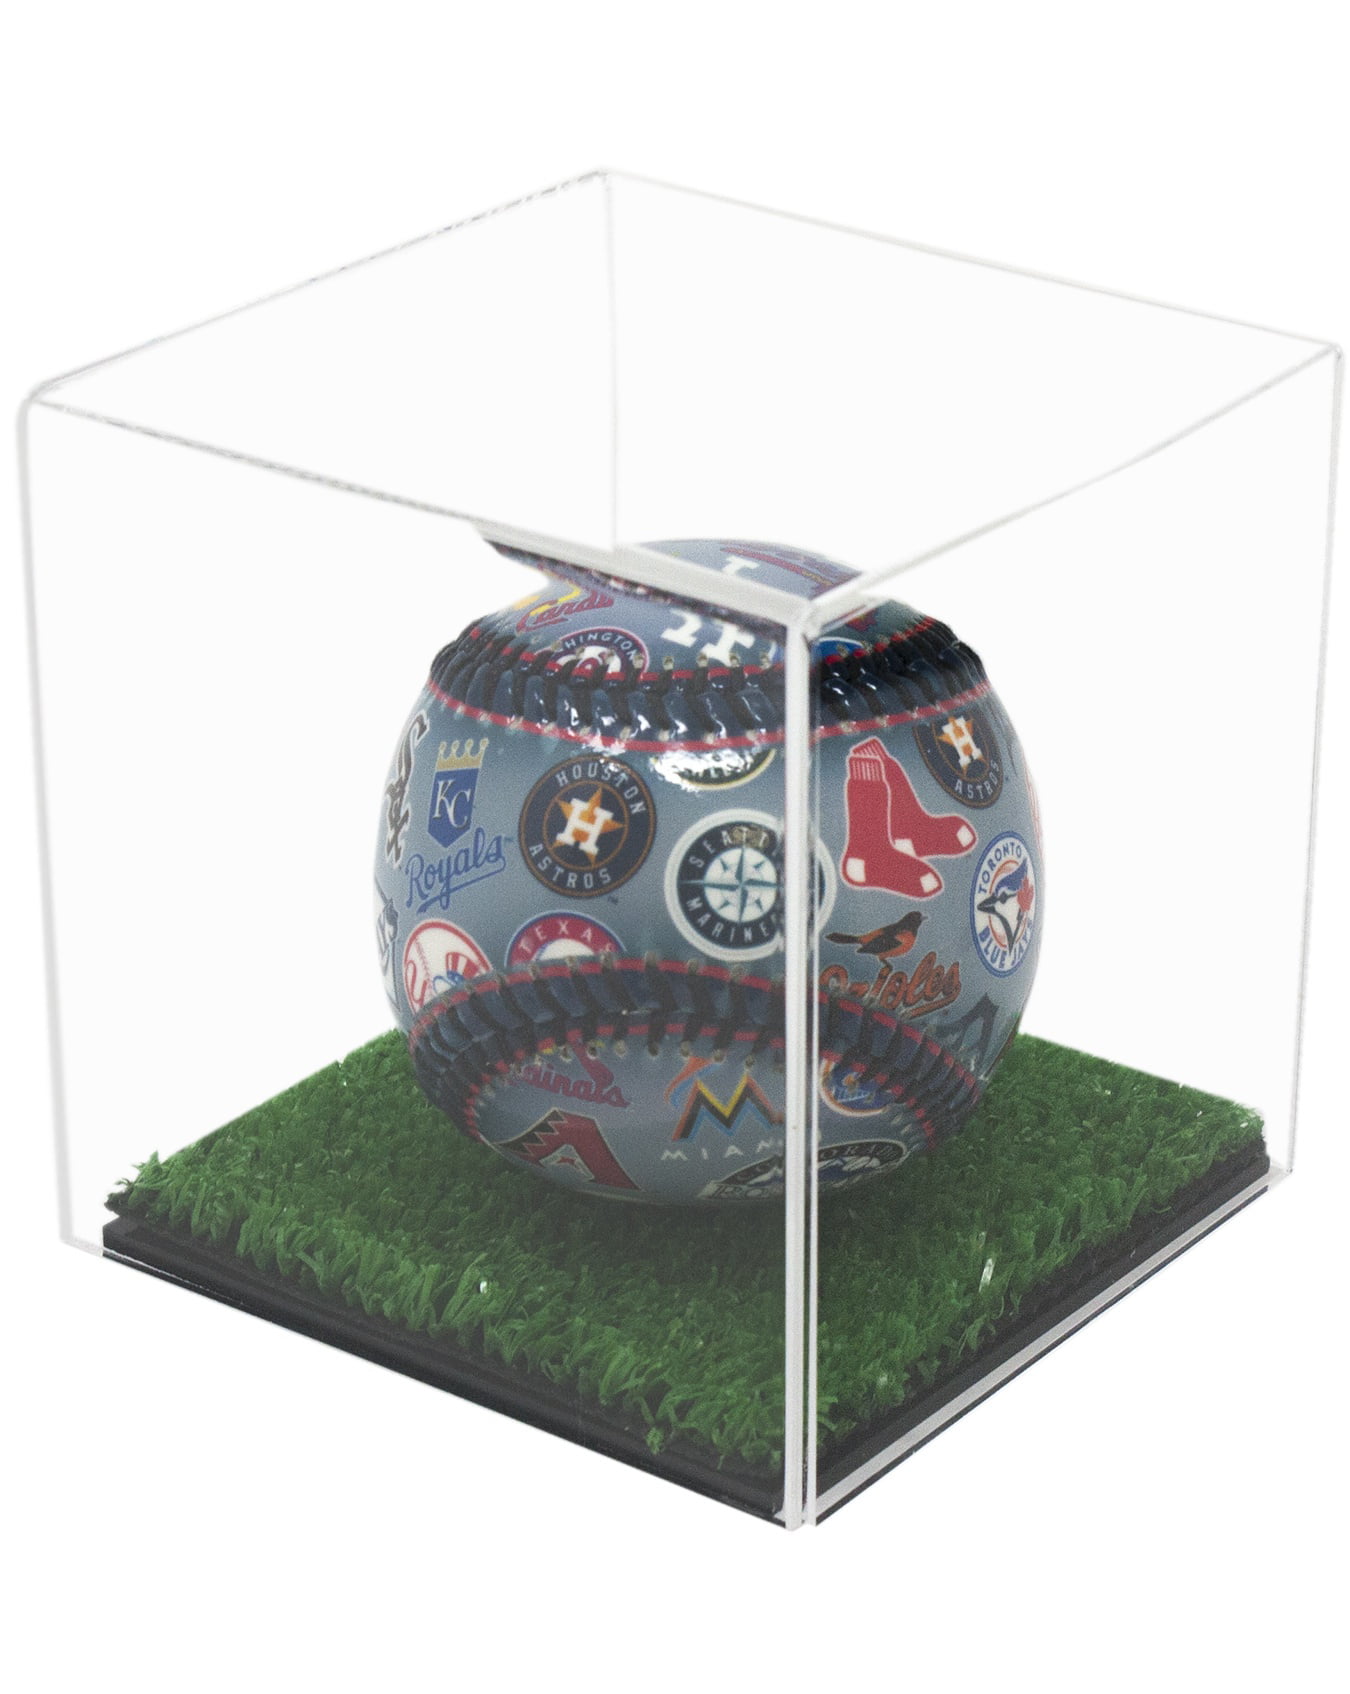 Details about   Versatile Turf Bottom Clear Display Case Square Box 3" x 3" x 3" A046-TB 